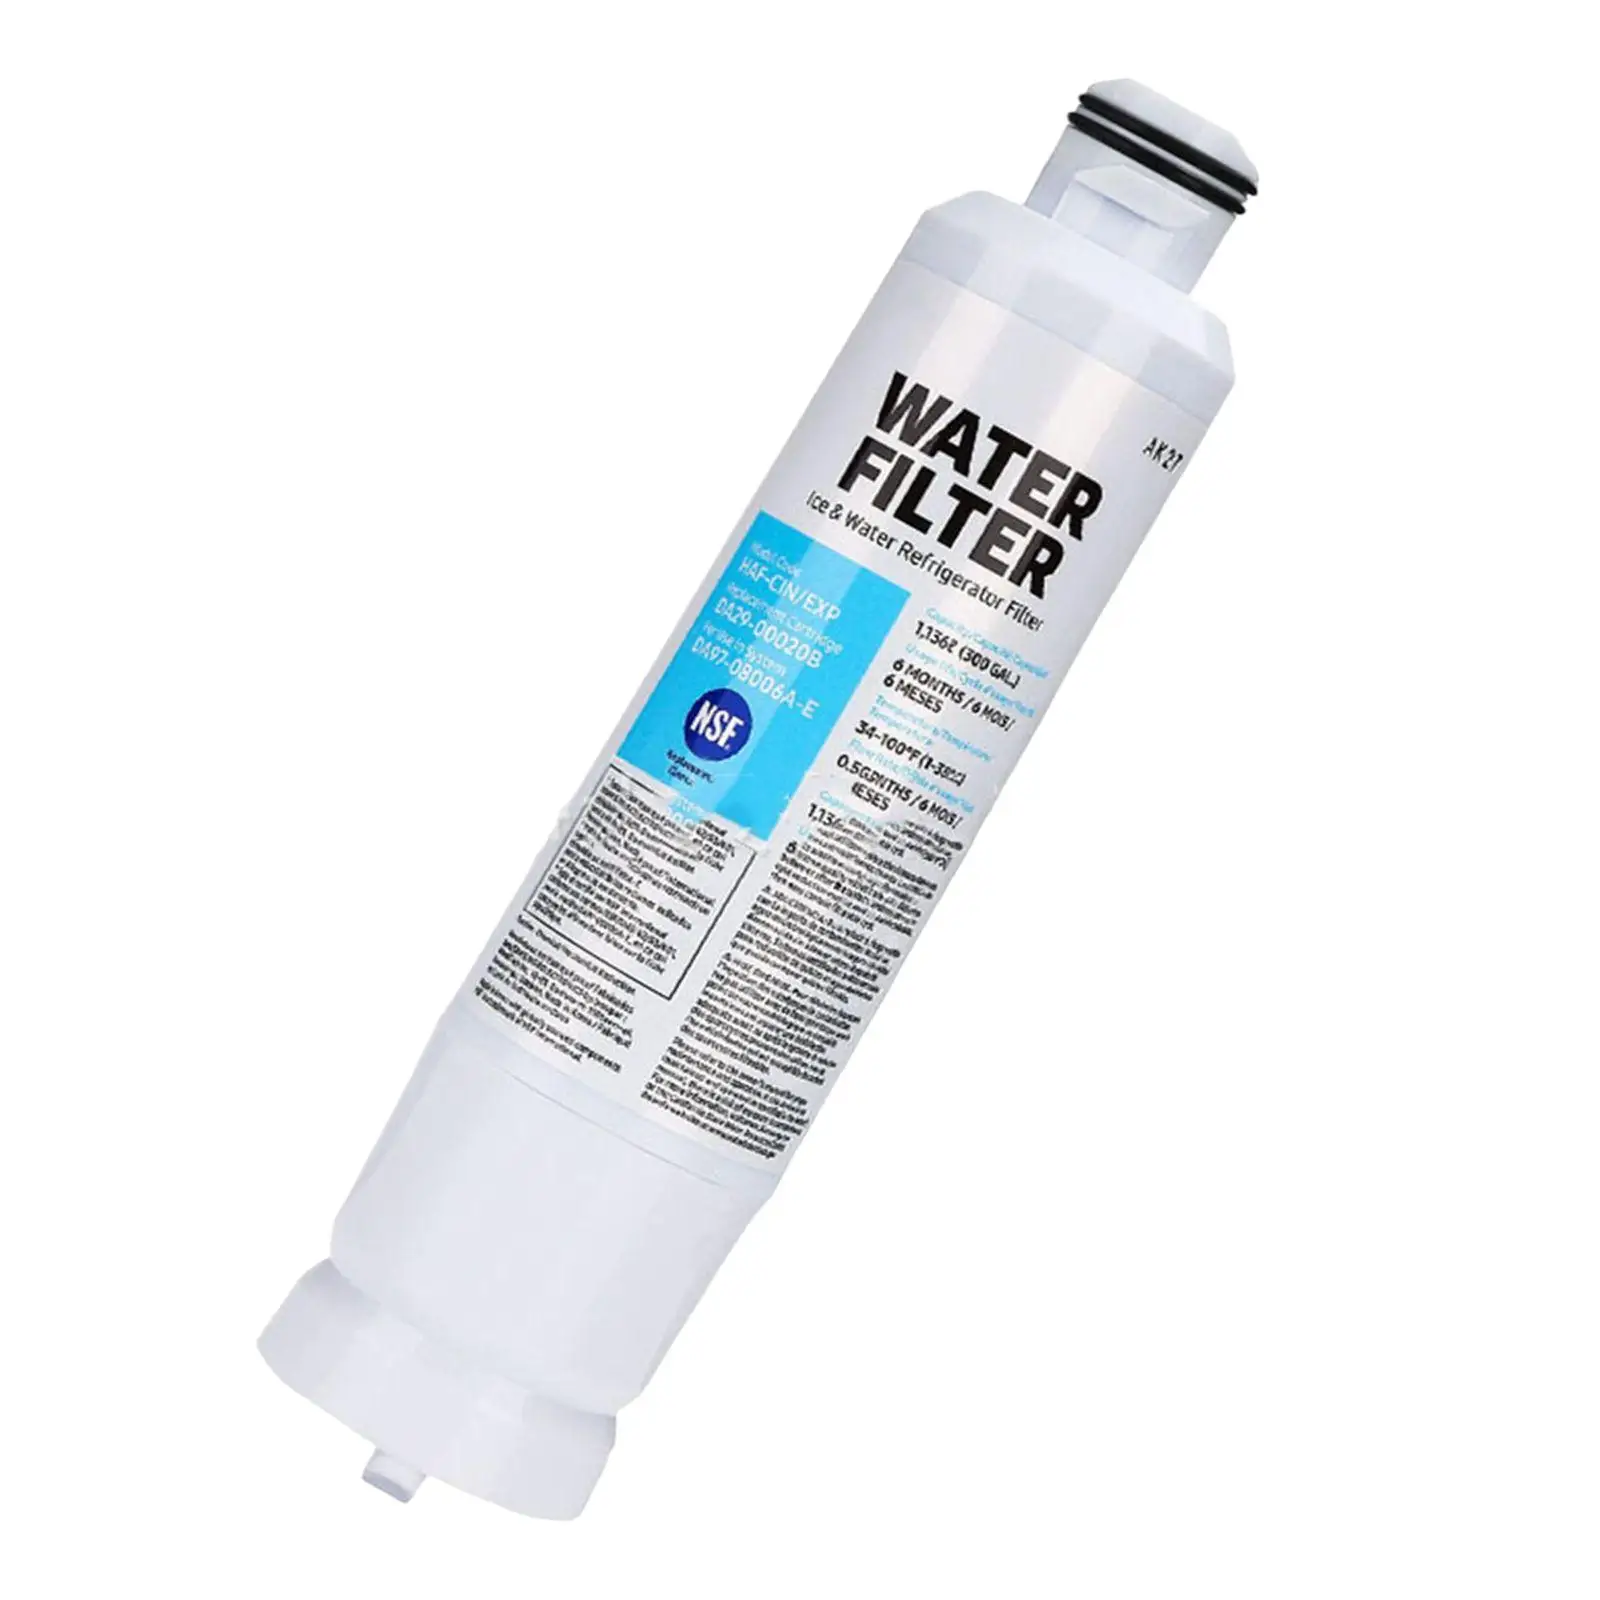 Refrigerator Water Filter Replacement Professional for da29 00020b Freezer Household